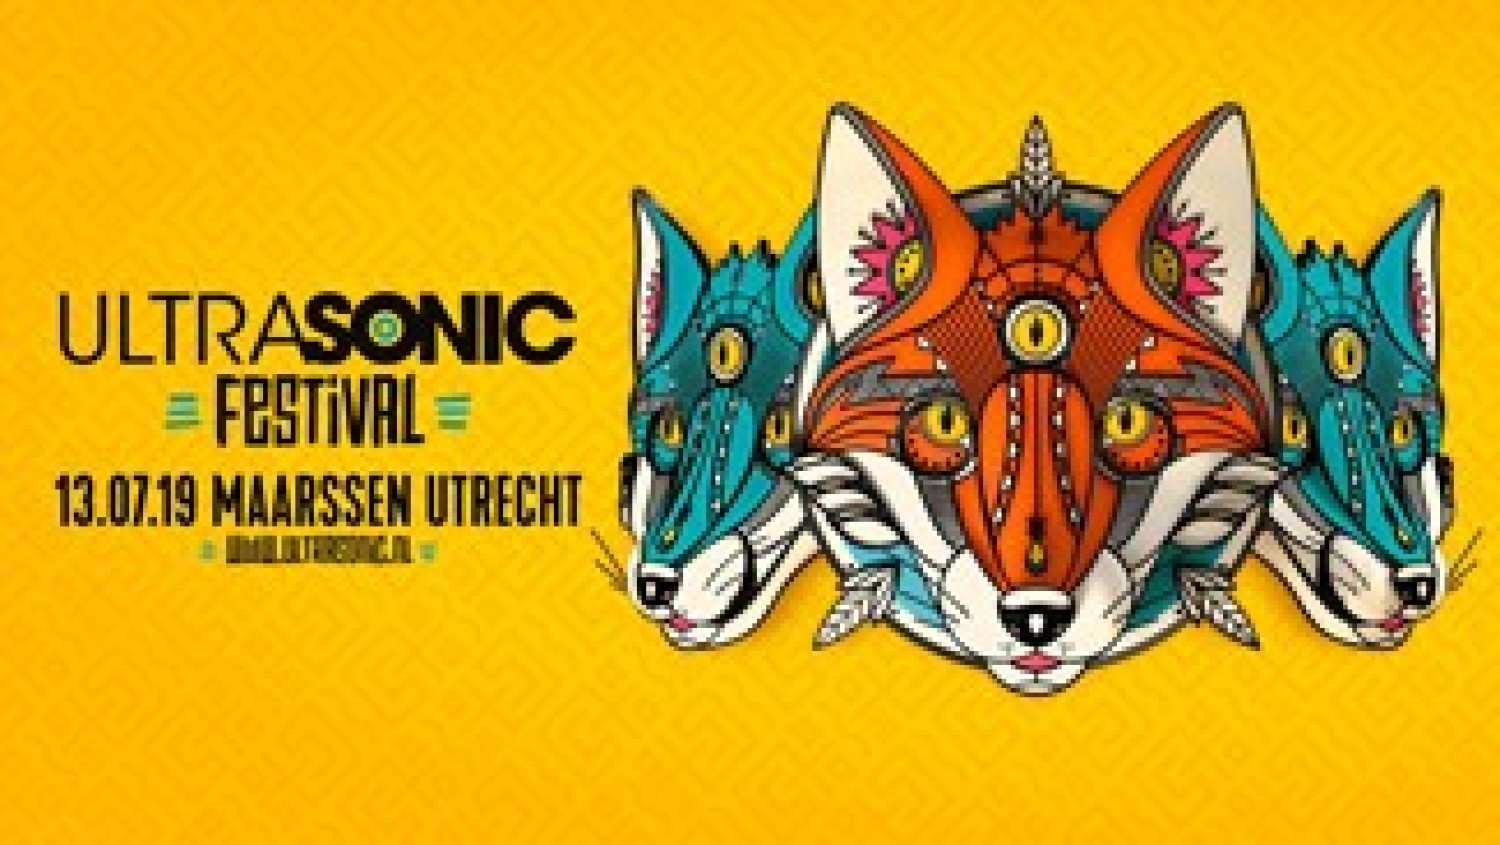 Party nieuws: Ultrasonic festival presenteert mainstage The Hill!